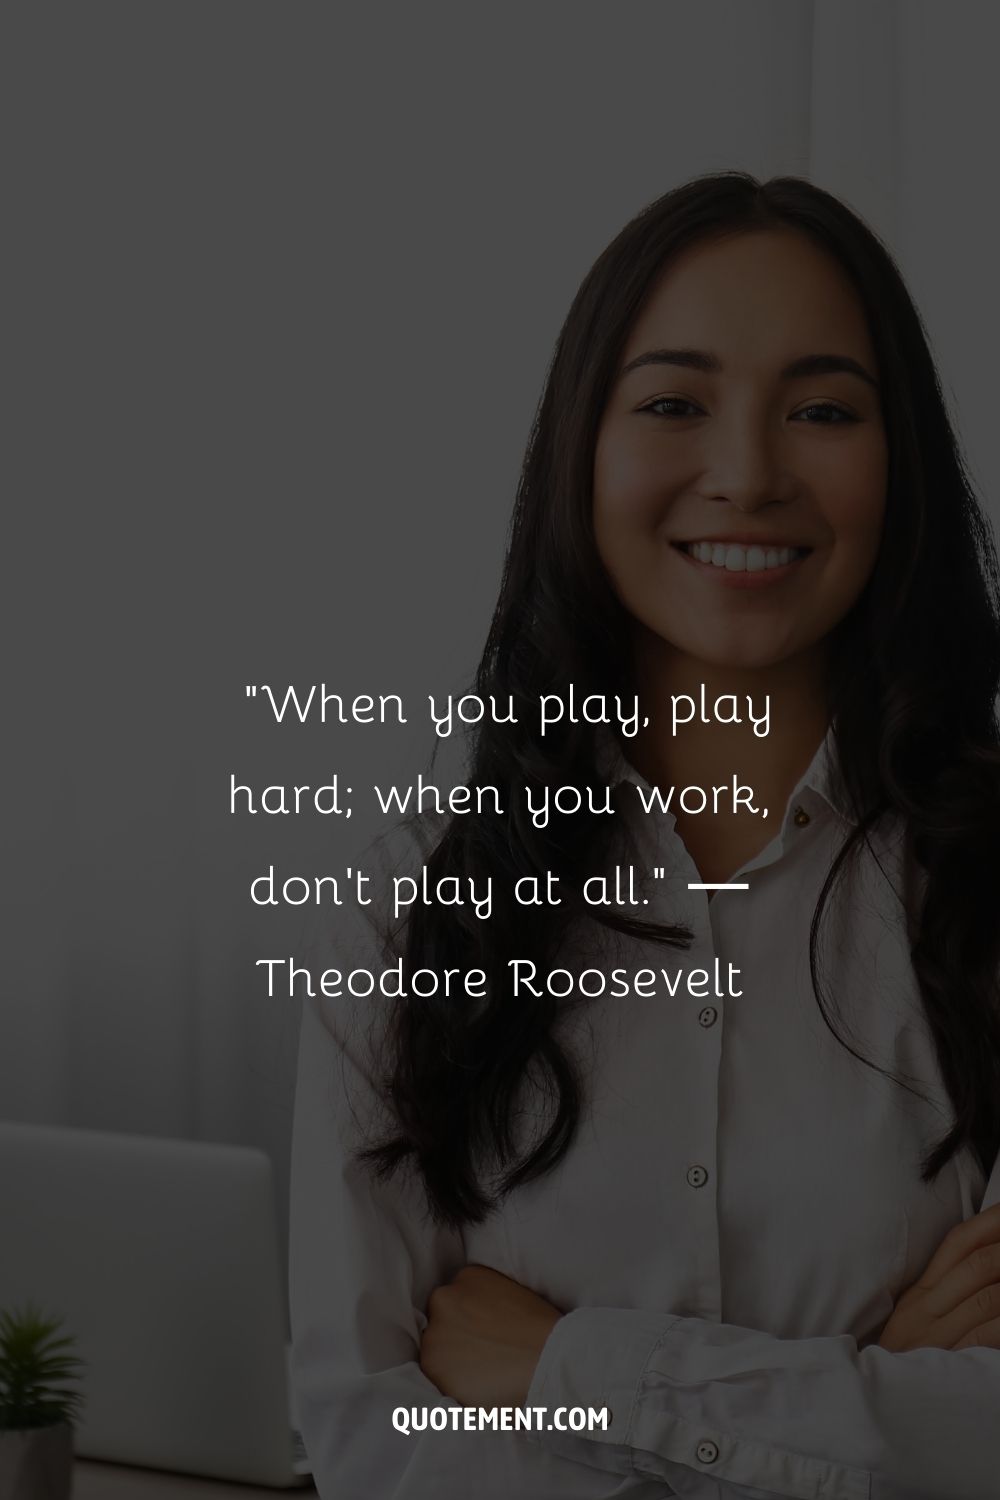 “When you play, play hard; when you work, don't play at all.” ― Theodore Roosevelt